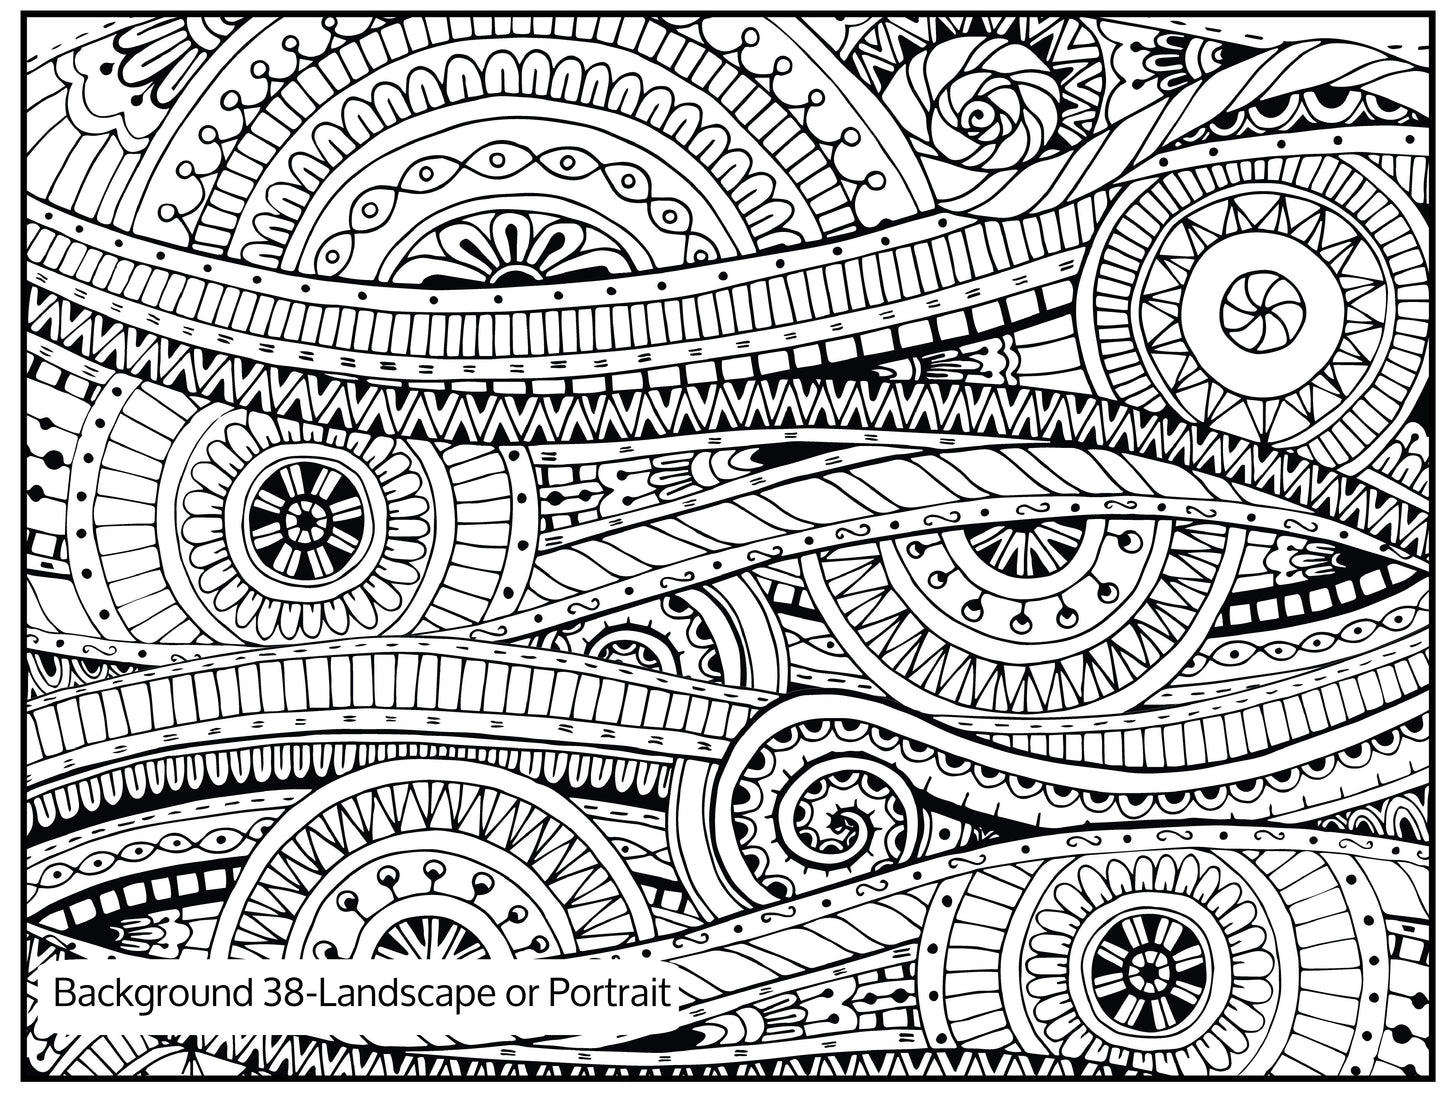 Background 38 Custom Personalized Giant Coloring Poster 46"x60"